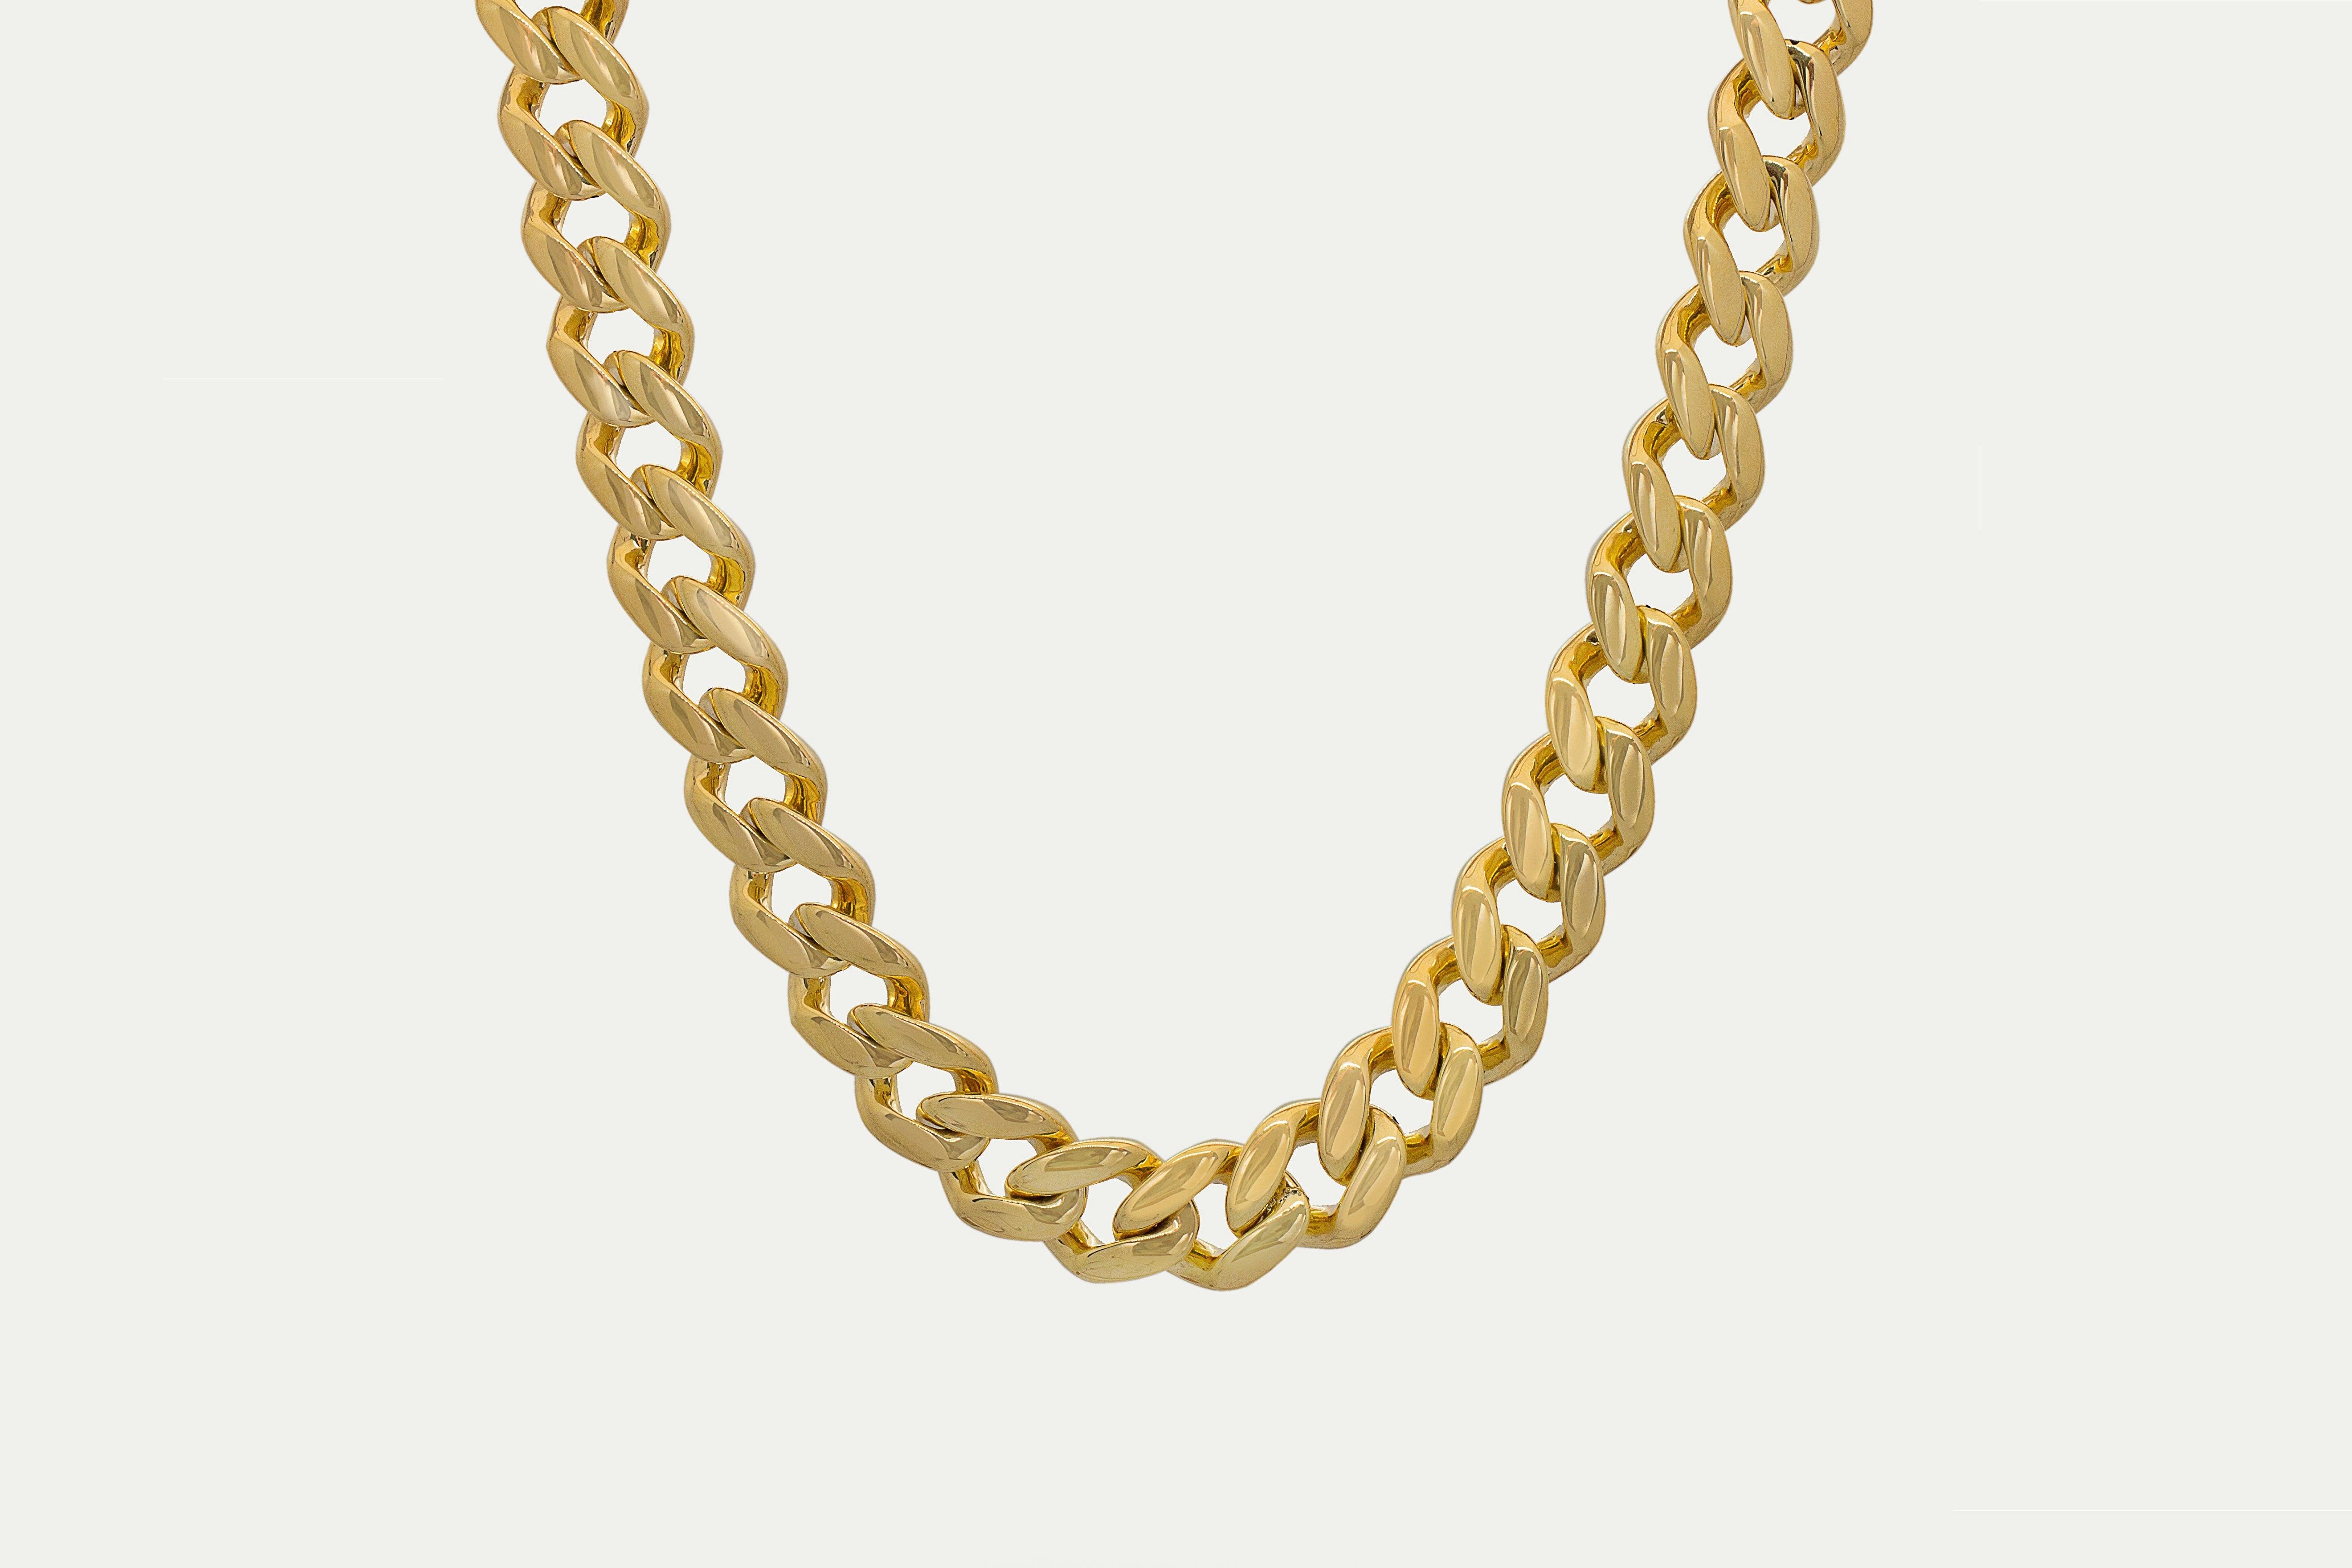 Necklace 18k solid yellow gold, Length 45 cm, Large